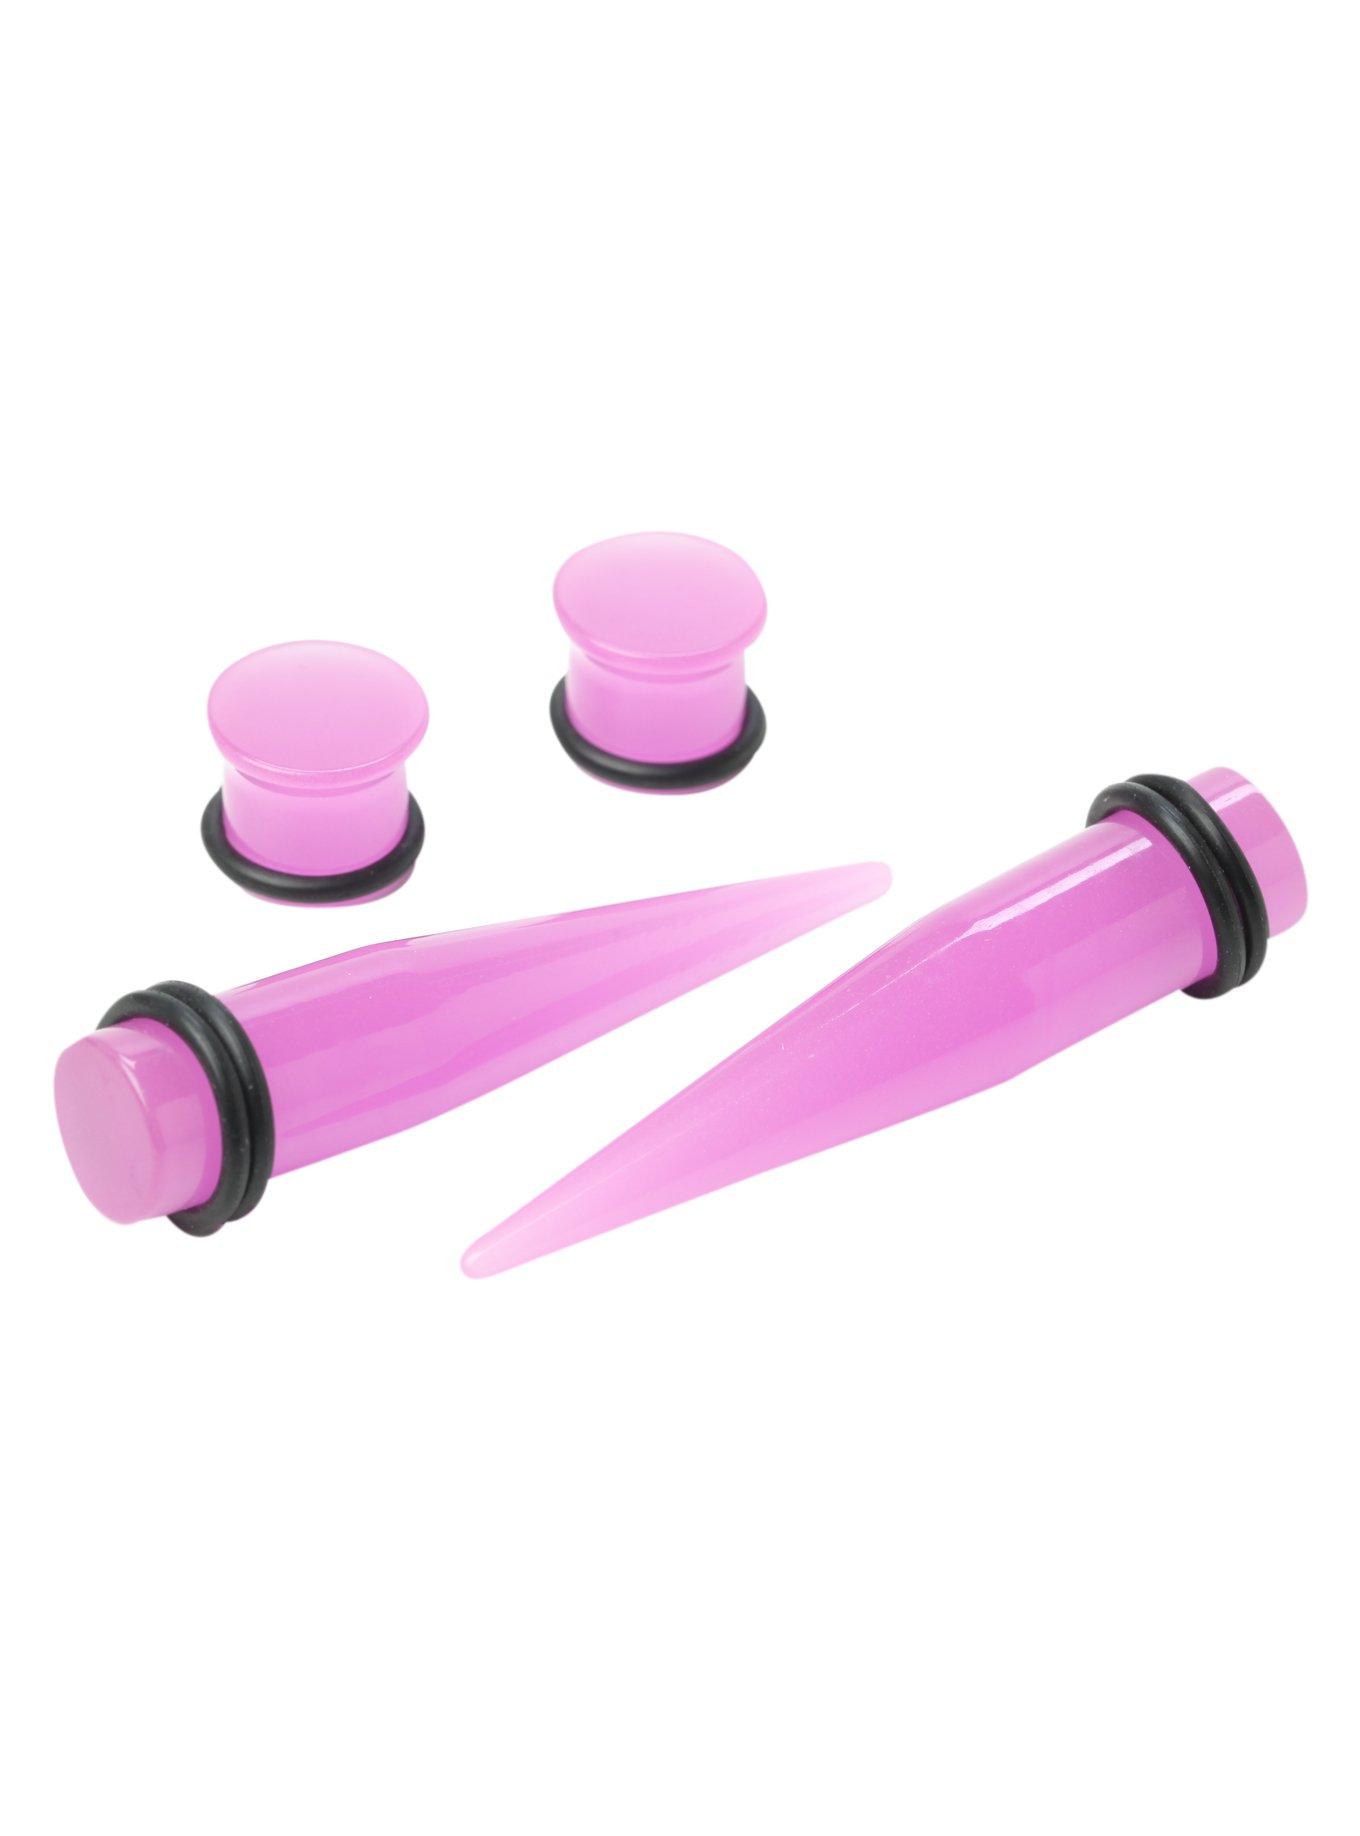 Acrylic Pink Glow-In-The-Dark Taper And Plug 4 Pack, BLACK, hi-res